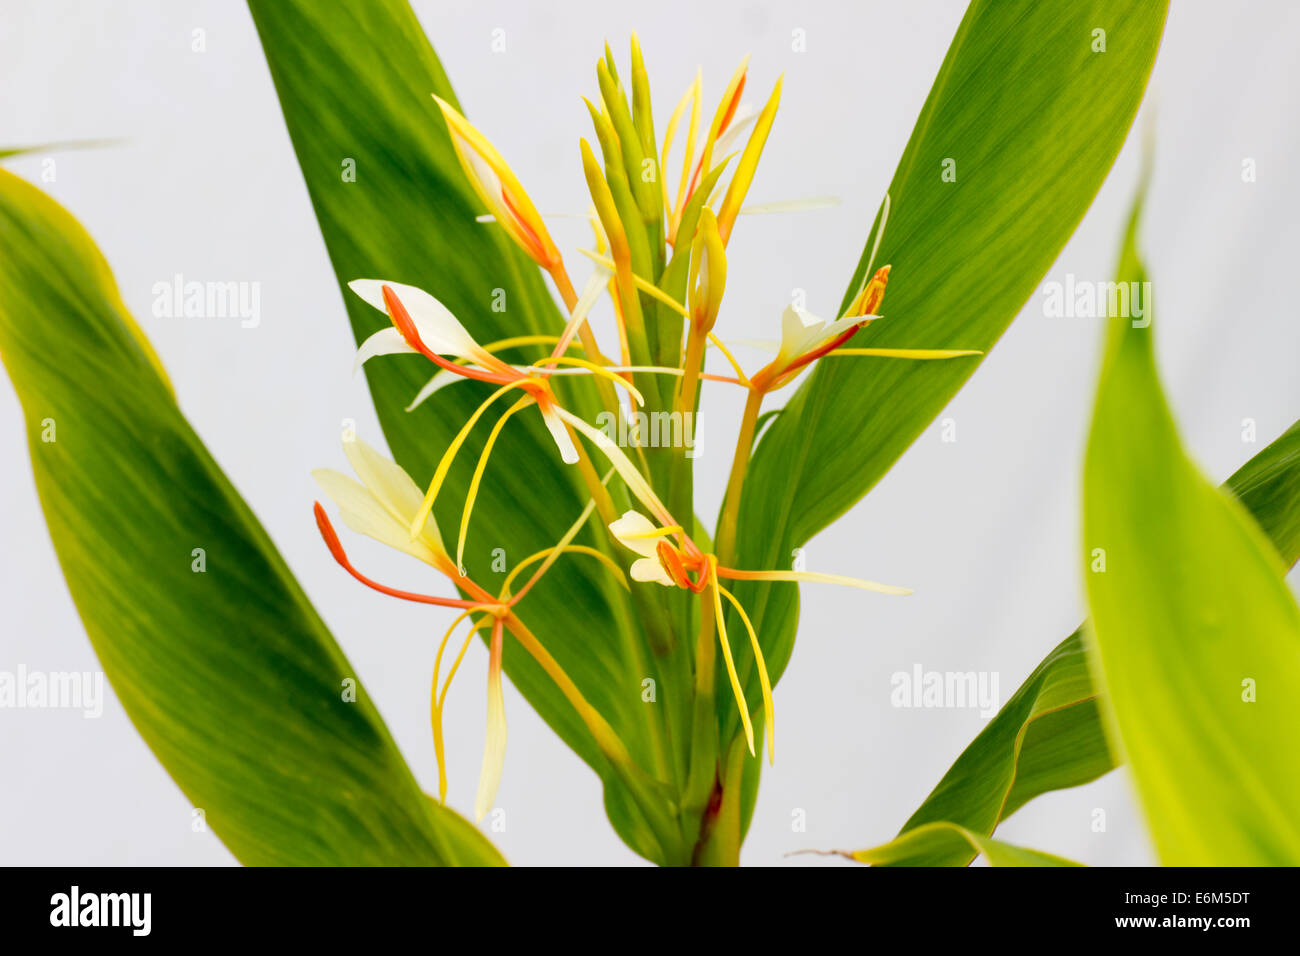 Flower spike of the hardy ginger, Hedychium spicatum PB 57188 Stock Photo